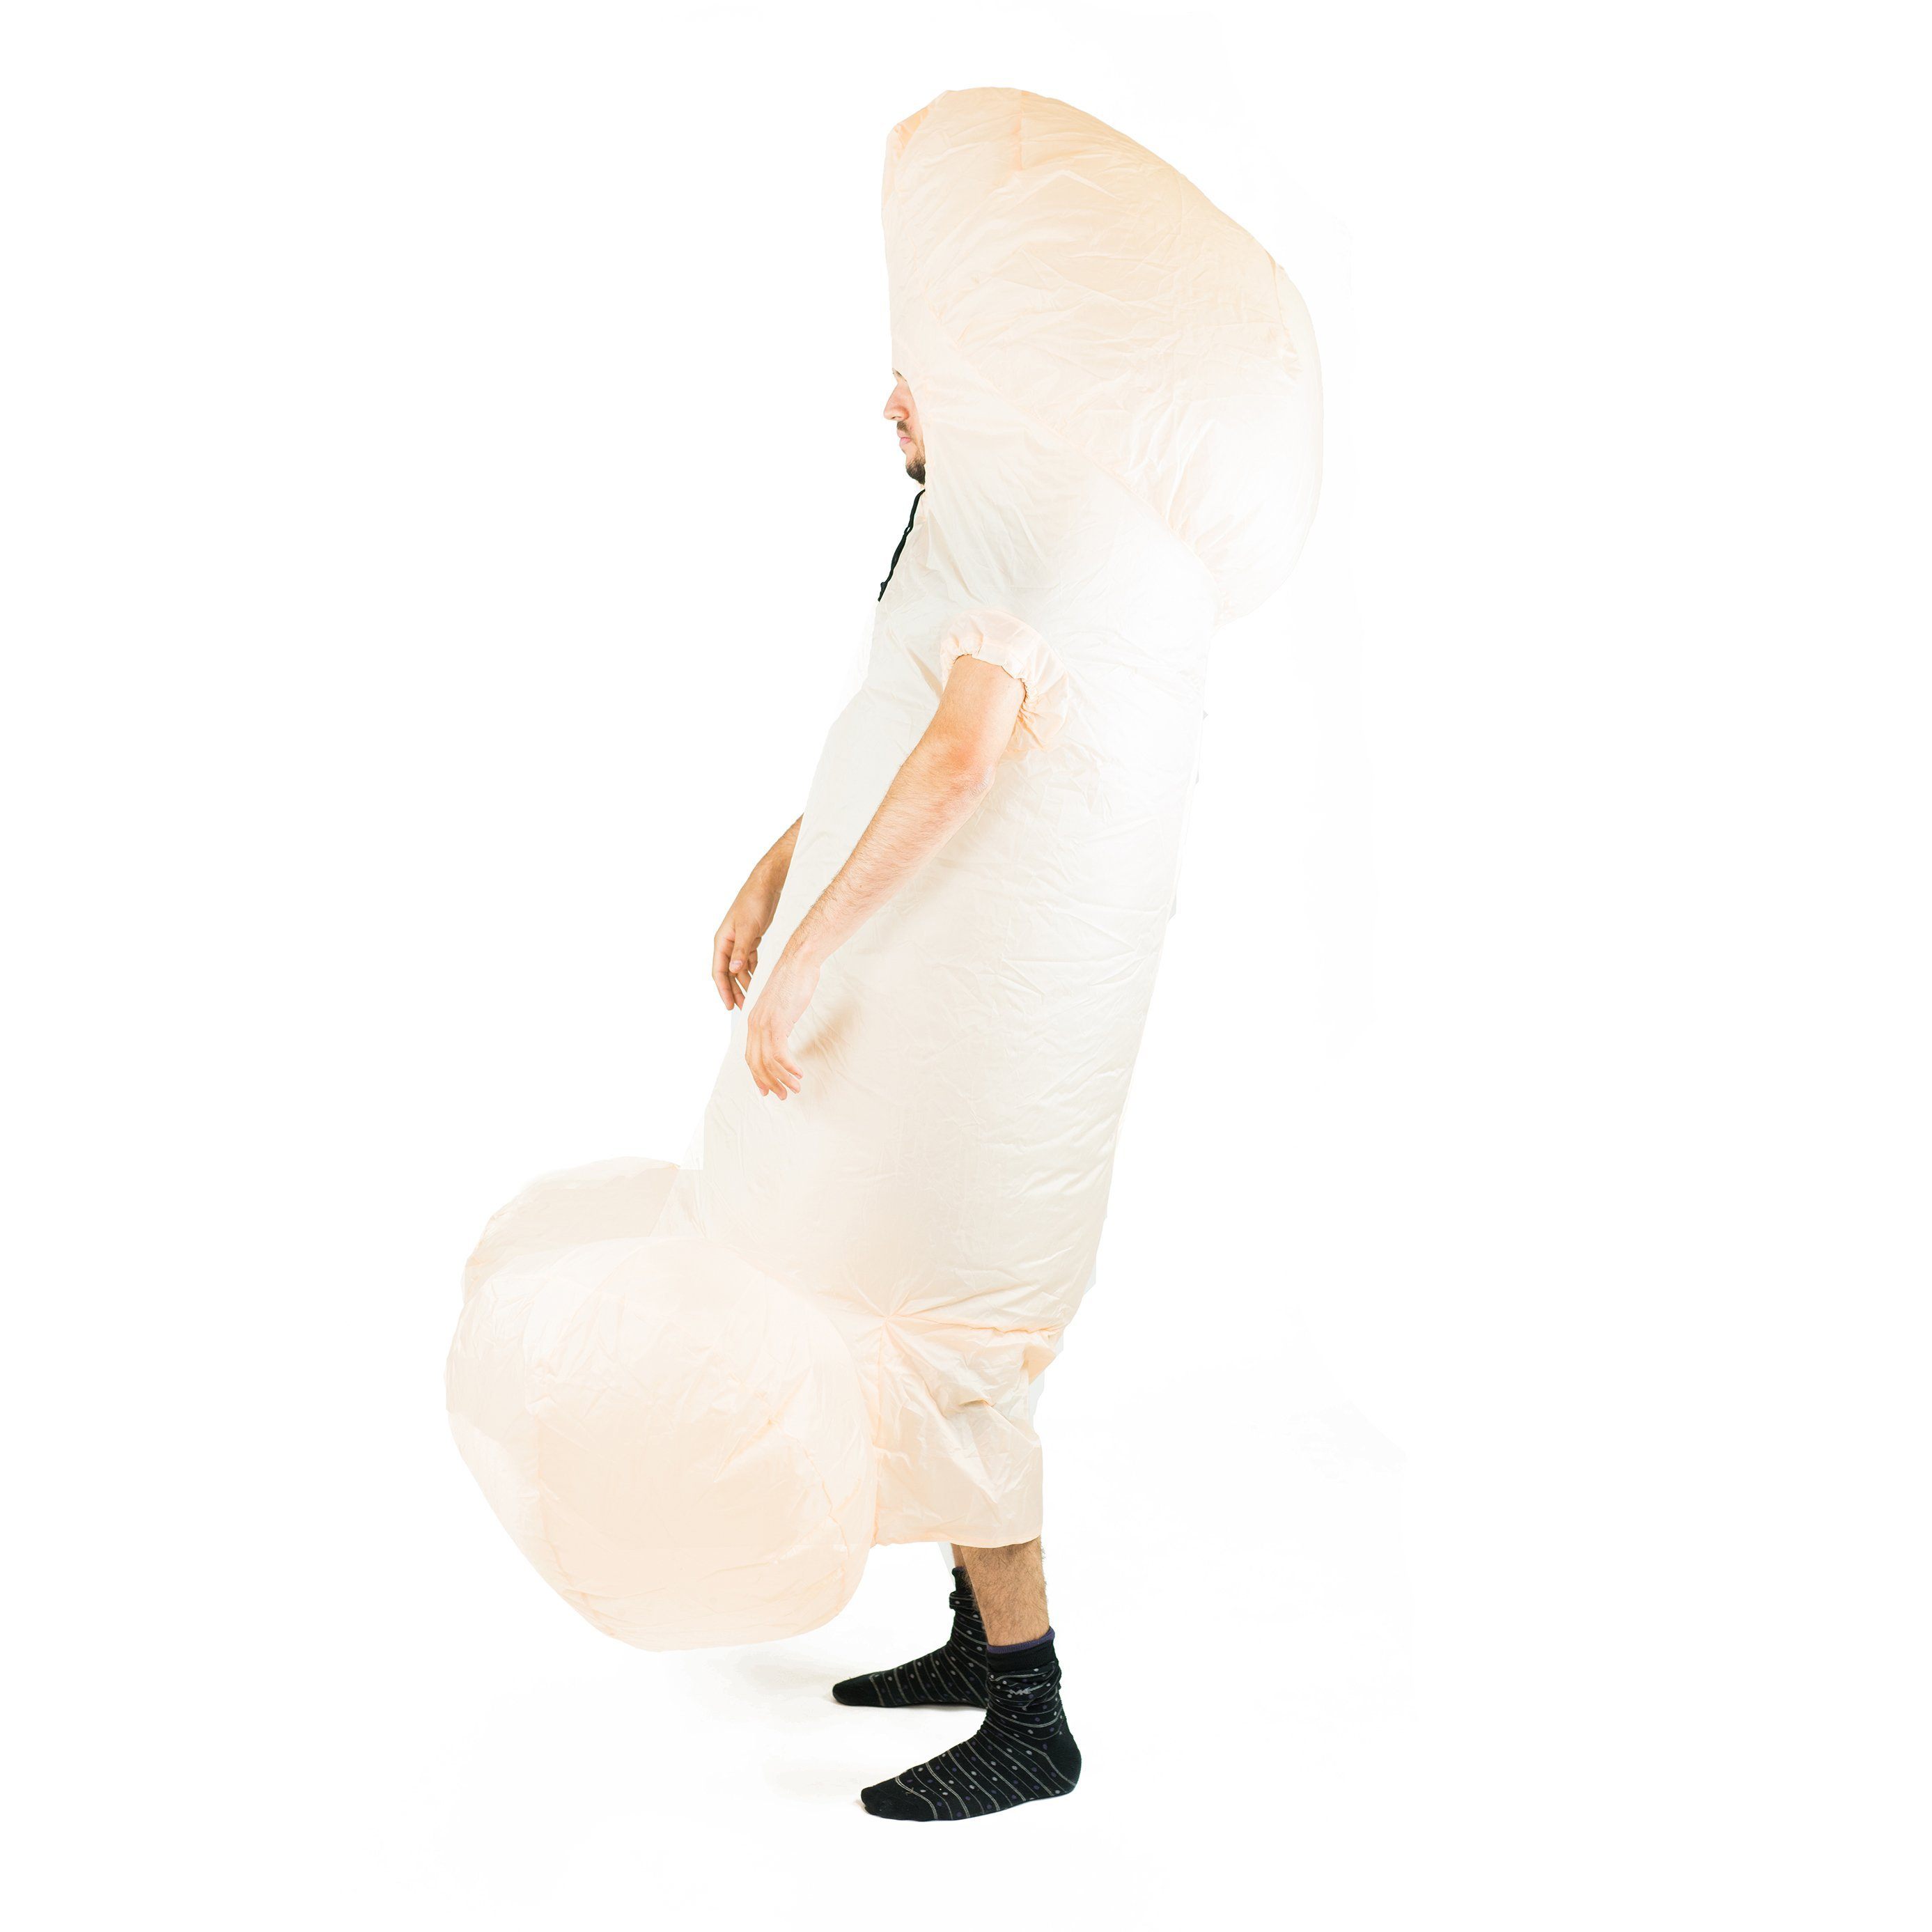 Fancy Dress - White Inflatable Willy Costume